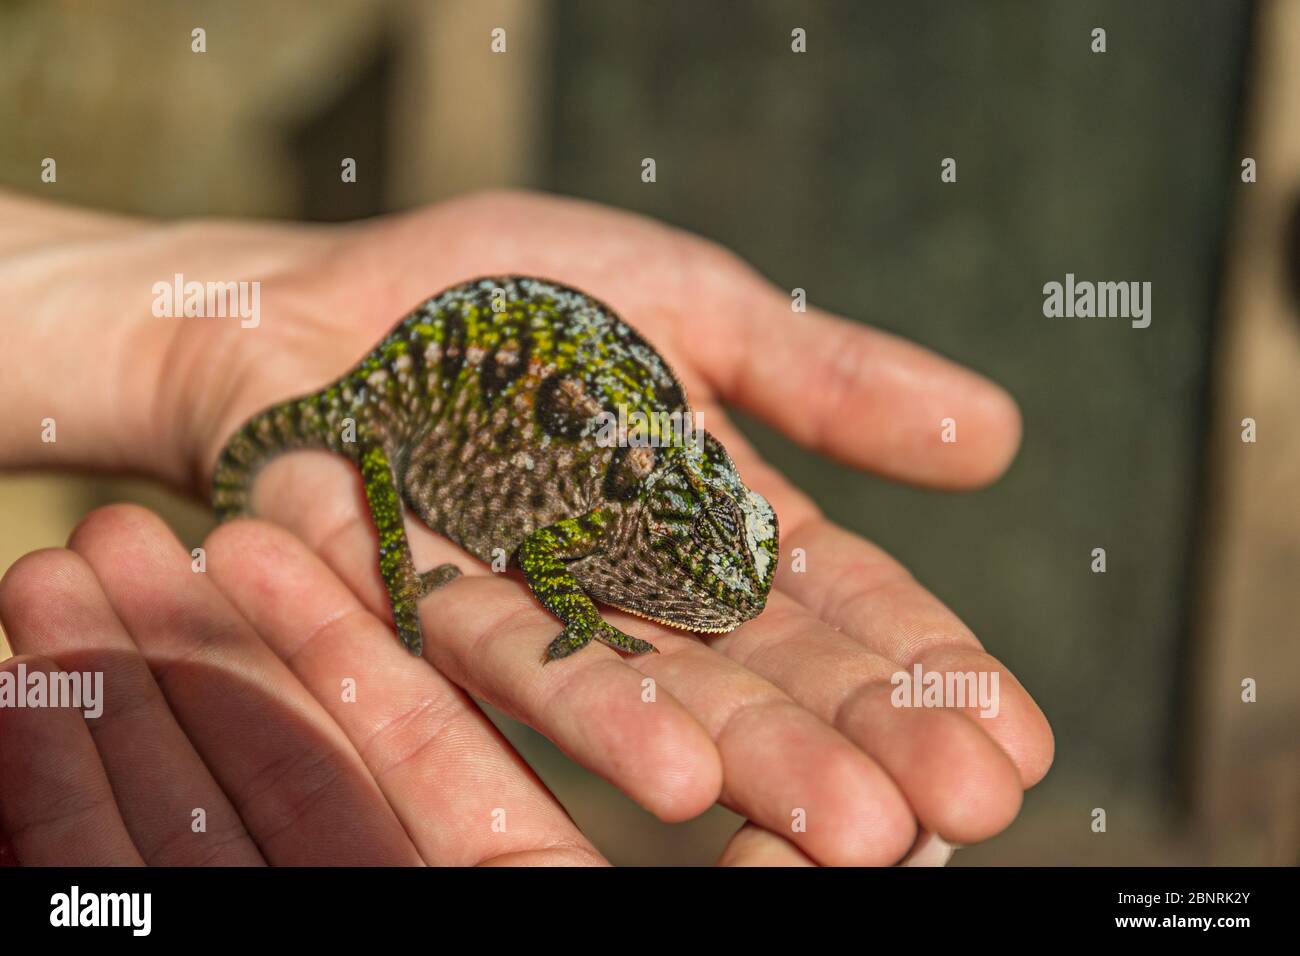 Multicolored chameleon sitting on a human hand Stock Photo